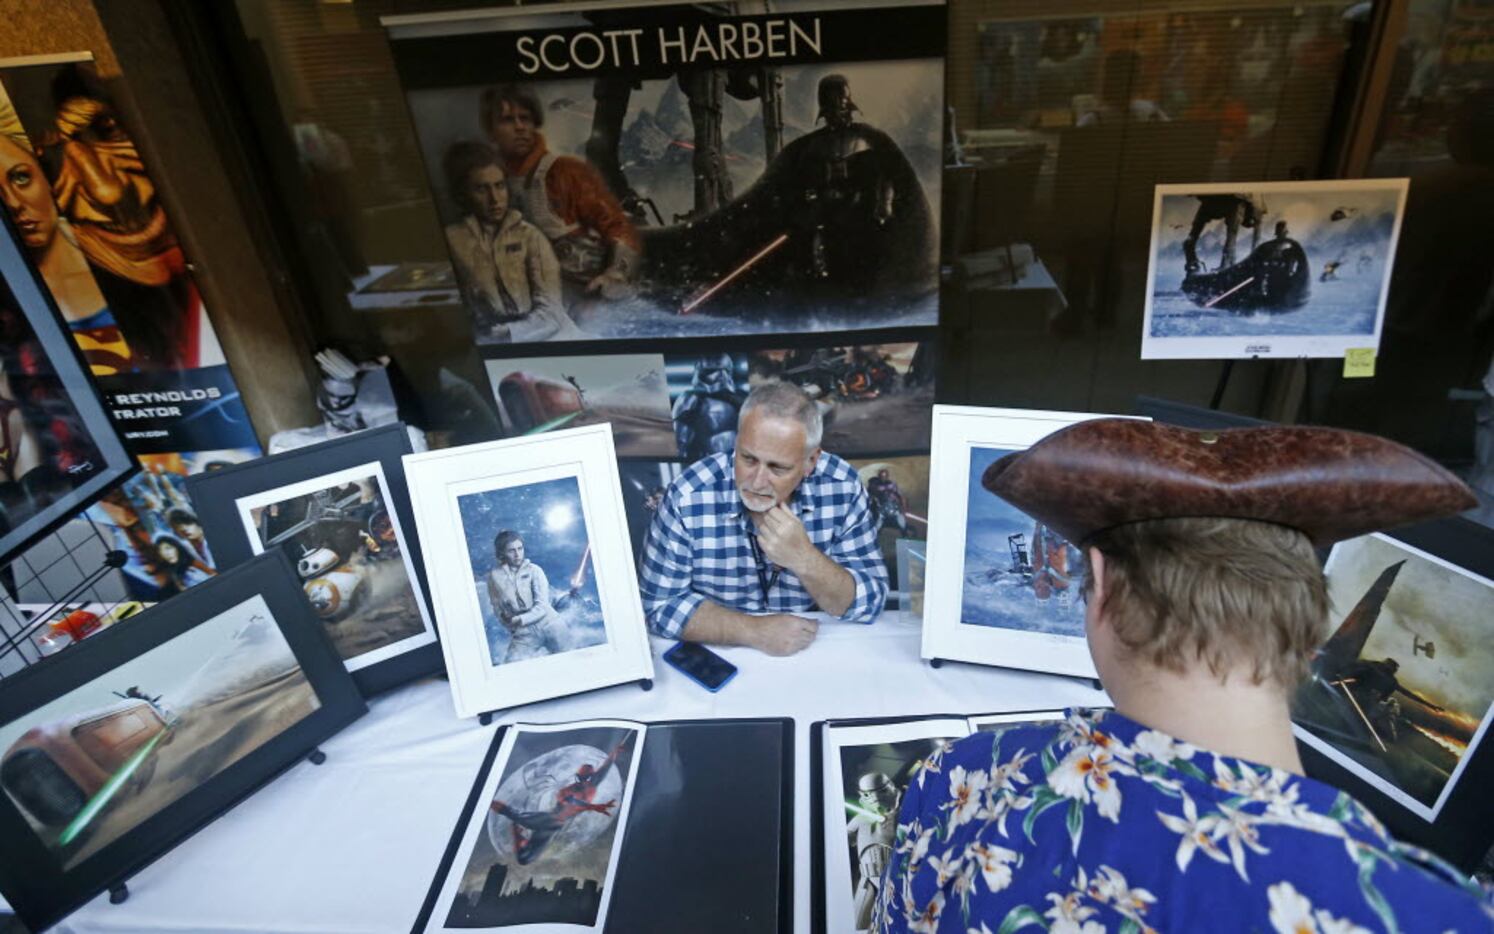 David Eaton (right) looks at artworks by Scott Harben during Dallas Comic Show at Richardson...